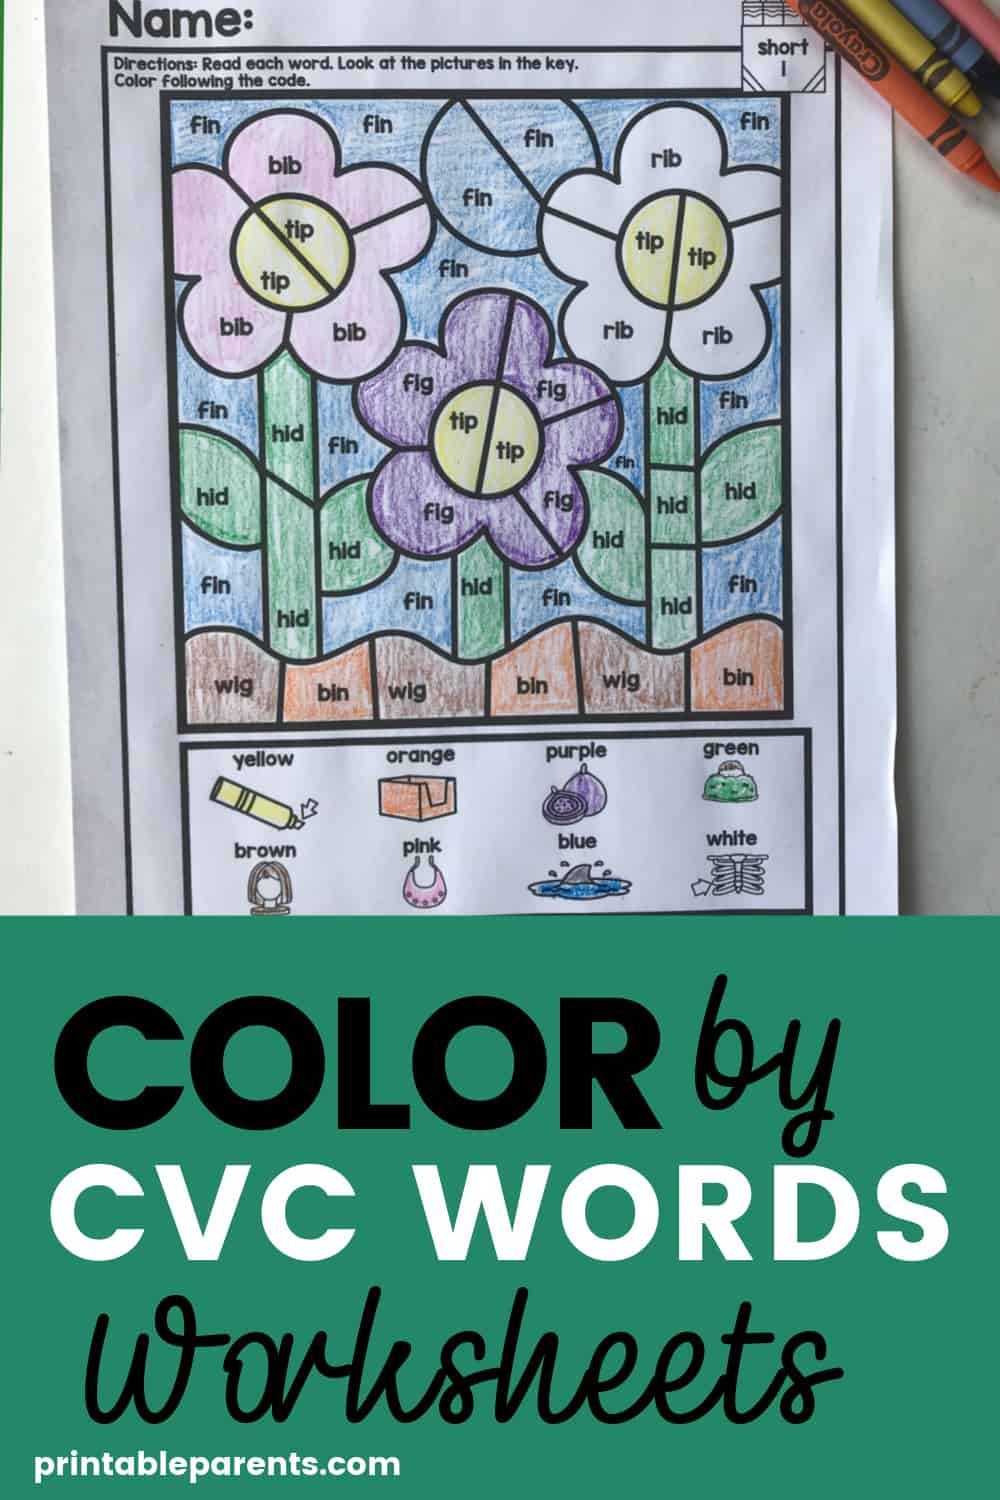 Color by cvc word